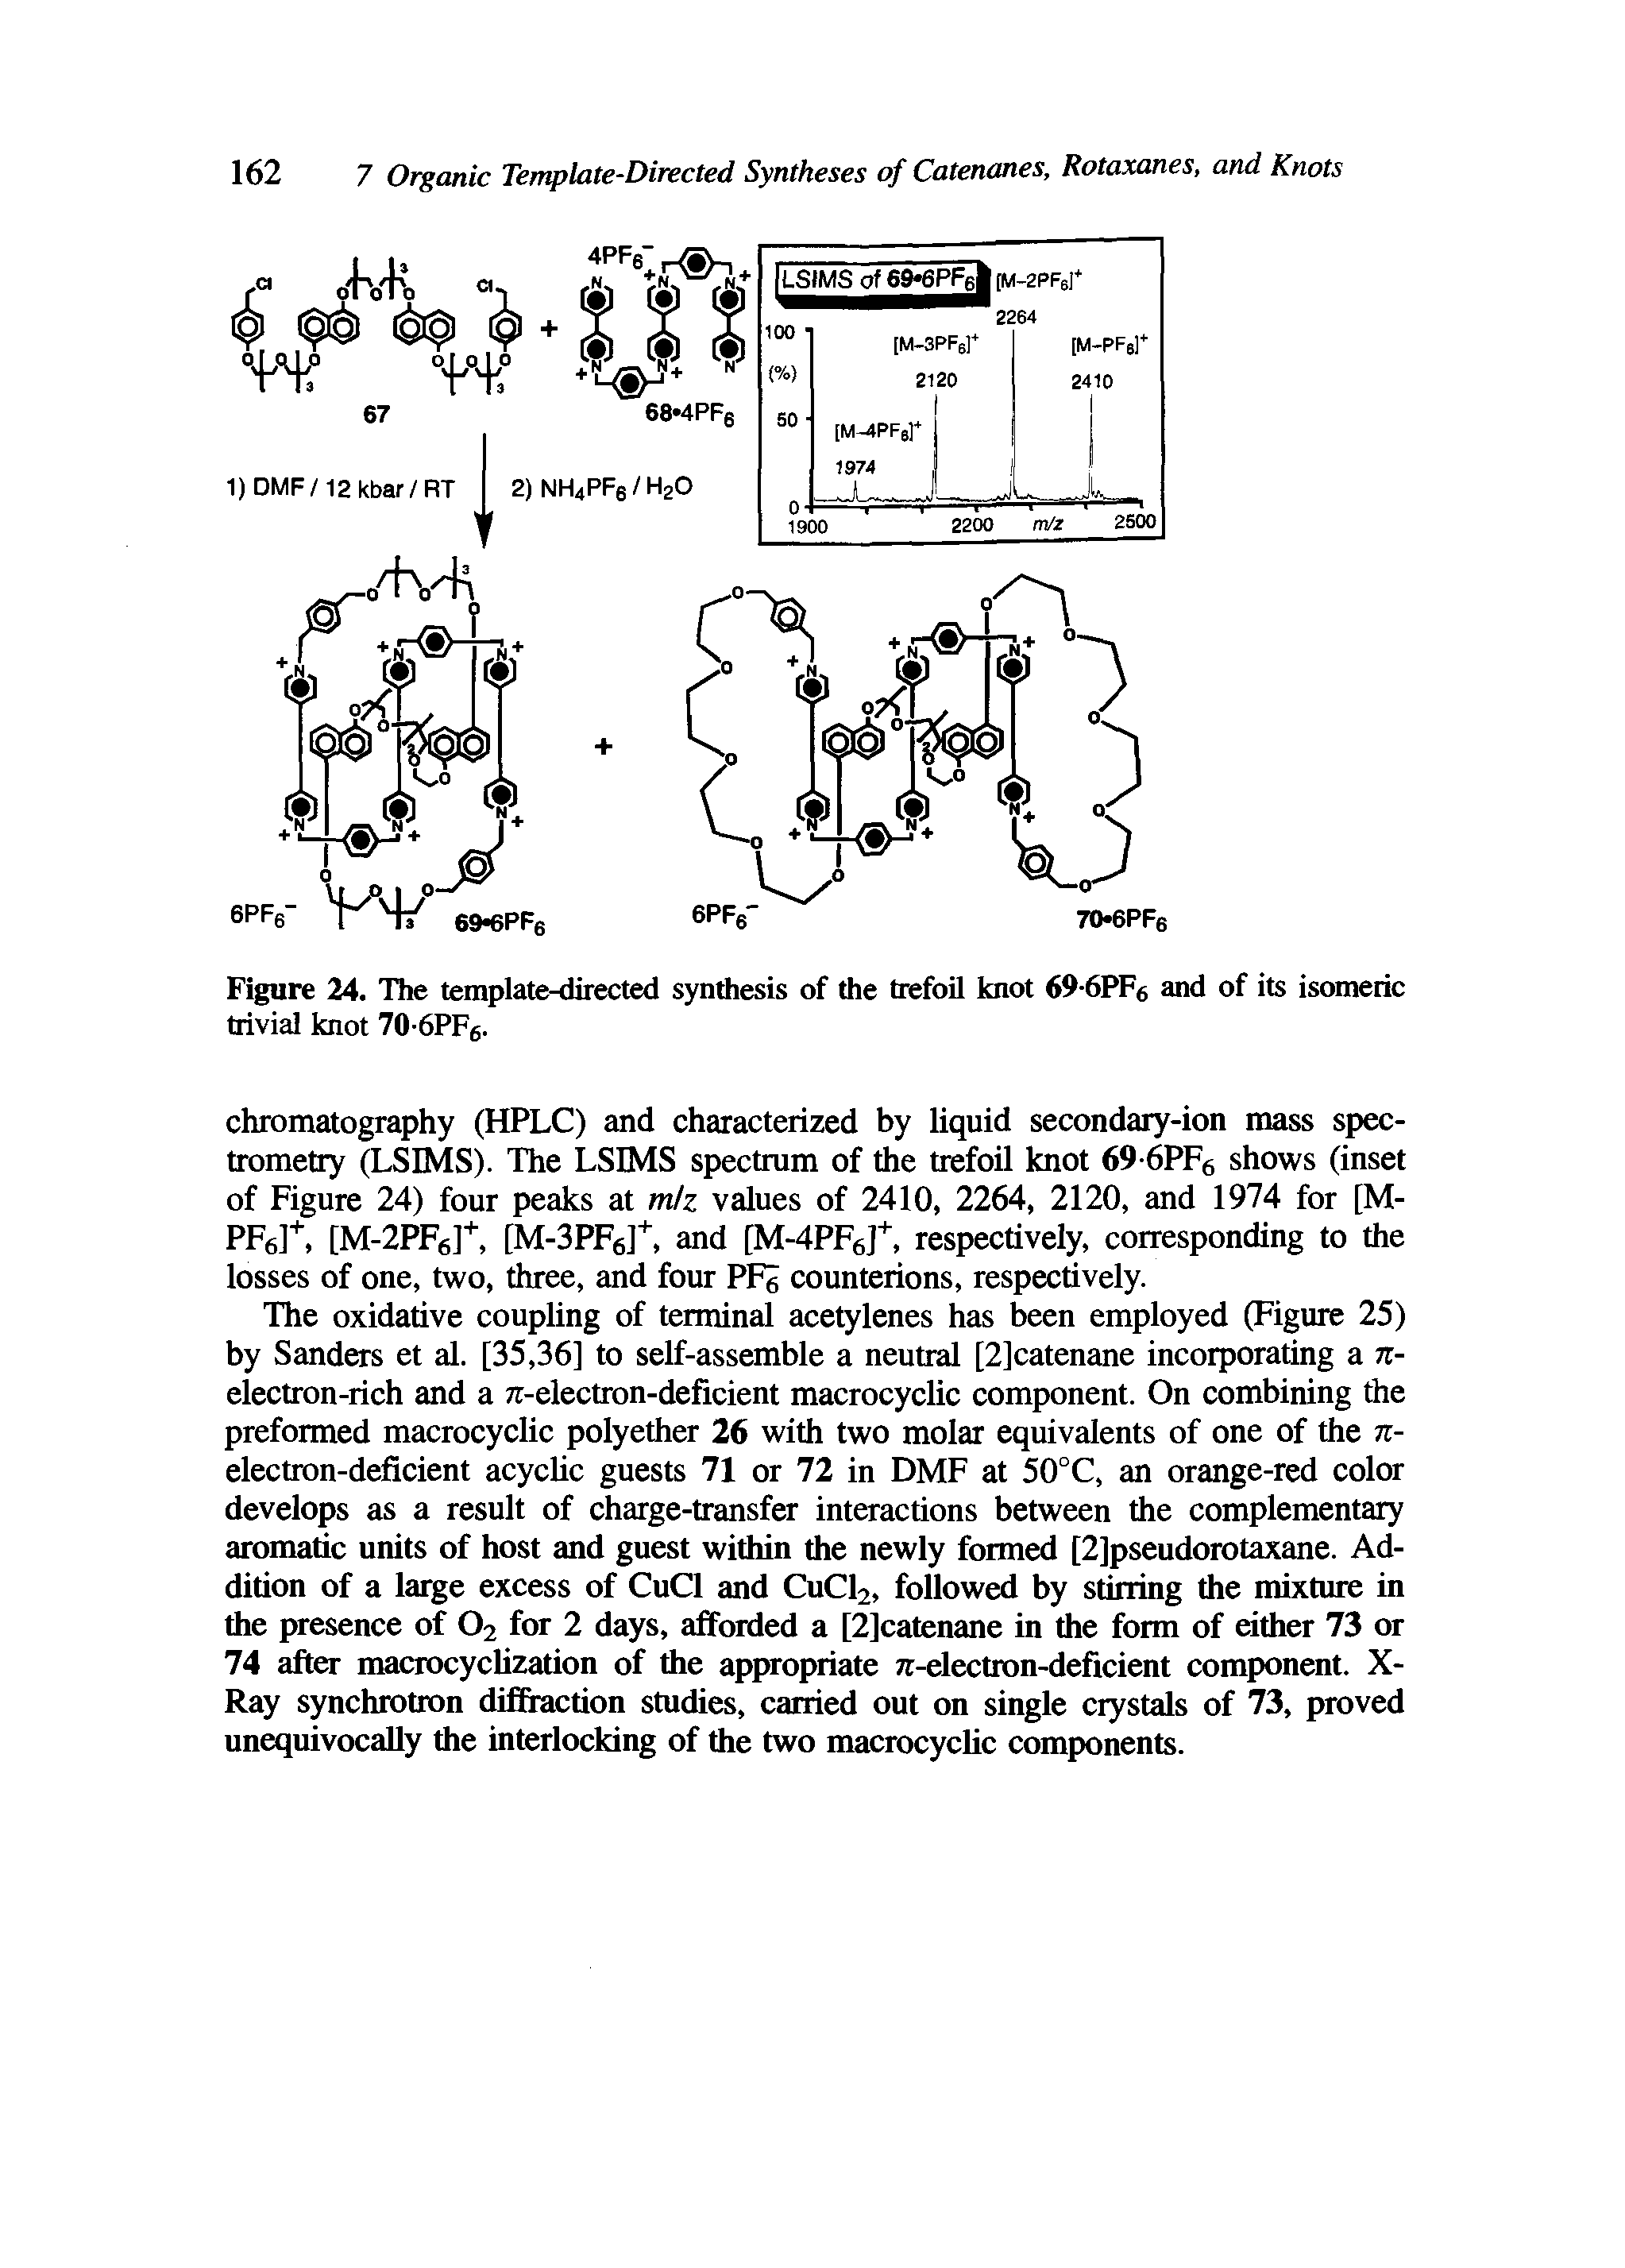 Figure 24. The template-directed synthesis of the trefoil knot 69-6PF6 and of its isomeric trivial knot 70-6PF6-...